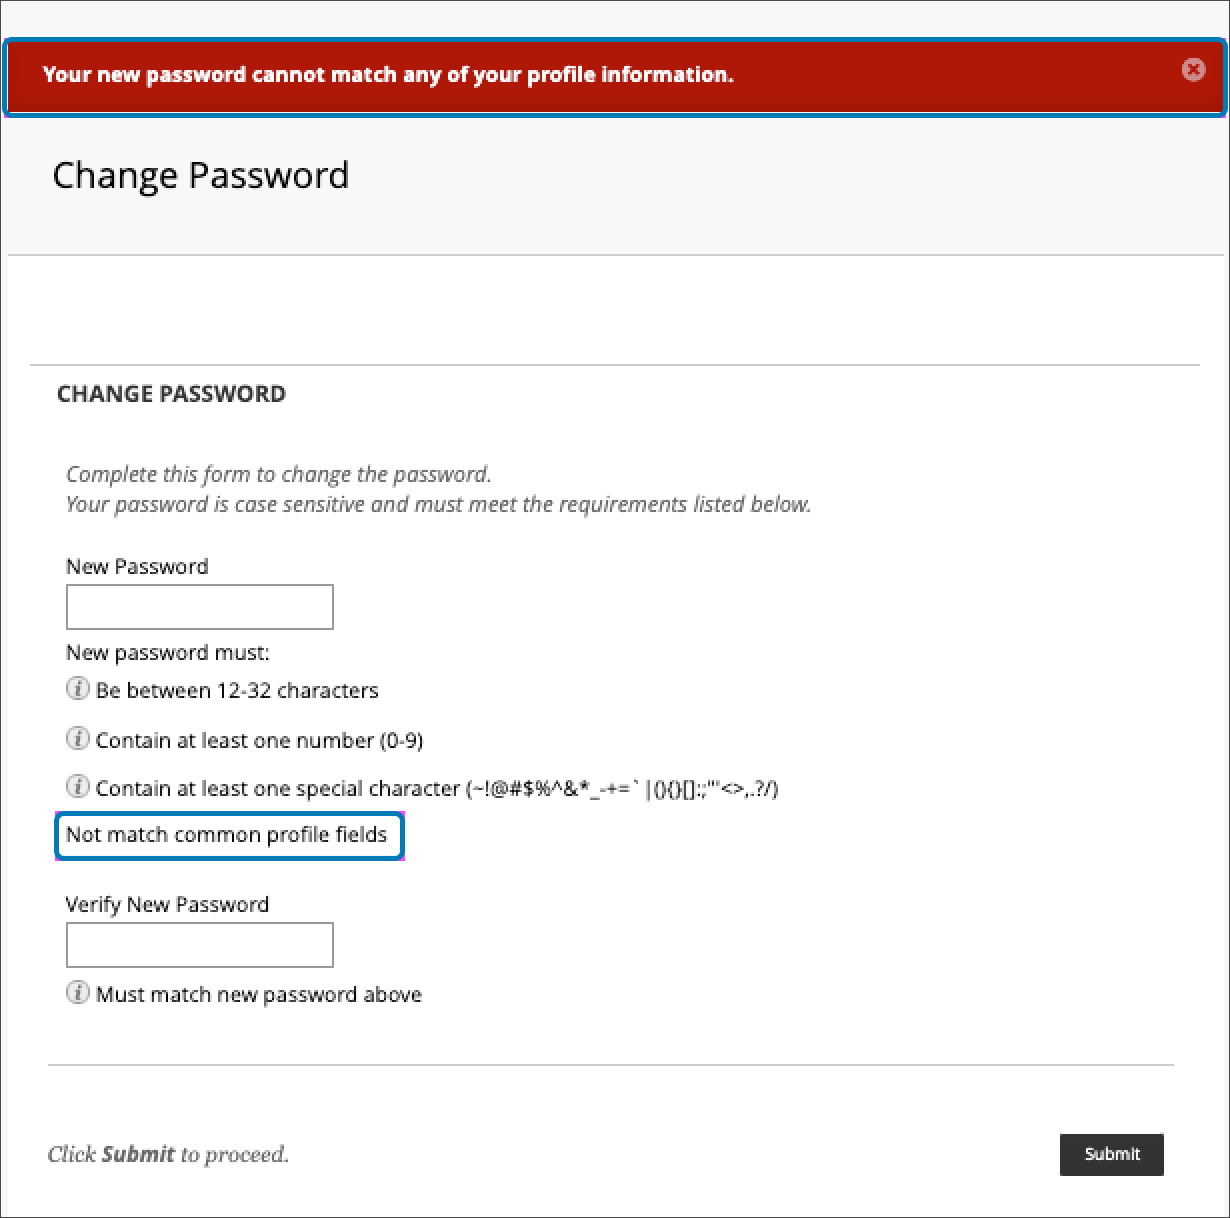 User is informed about not using profile information when changing a password